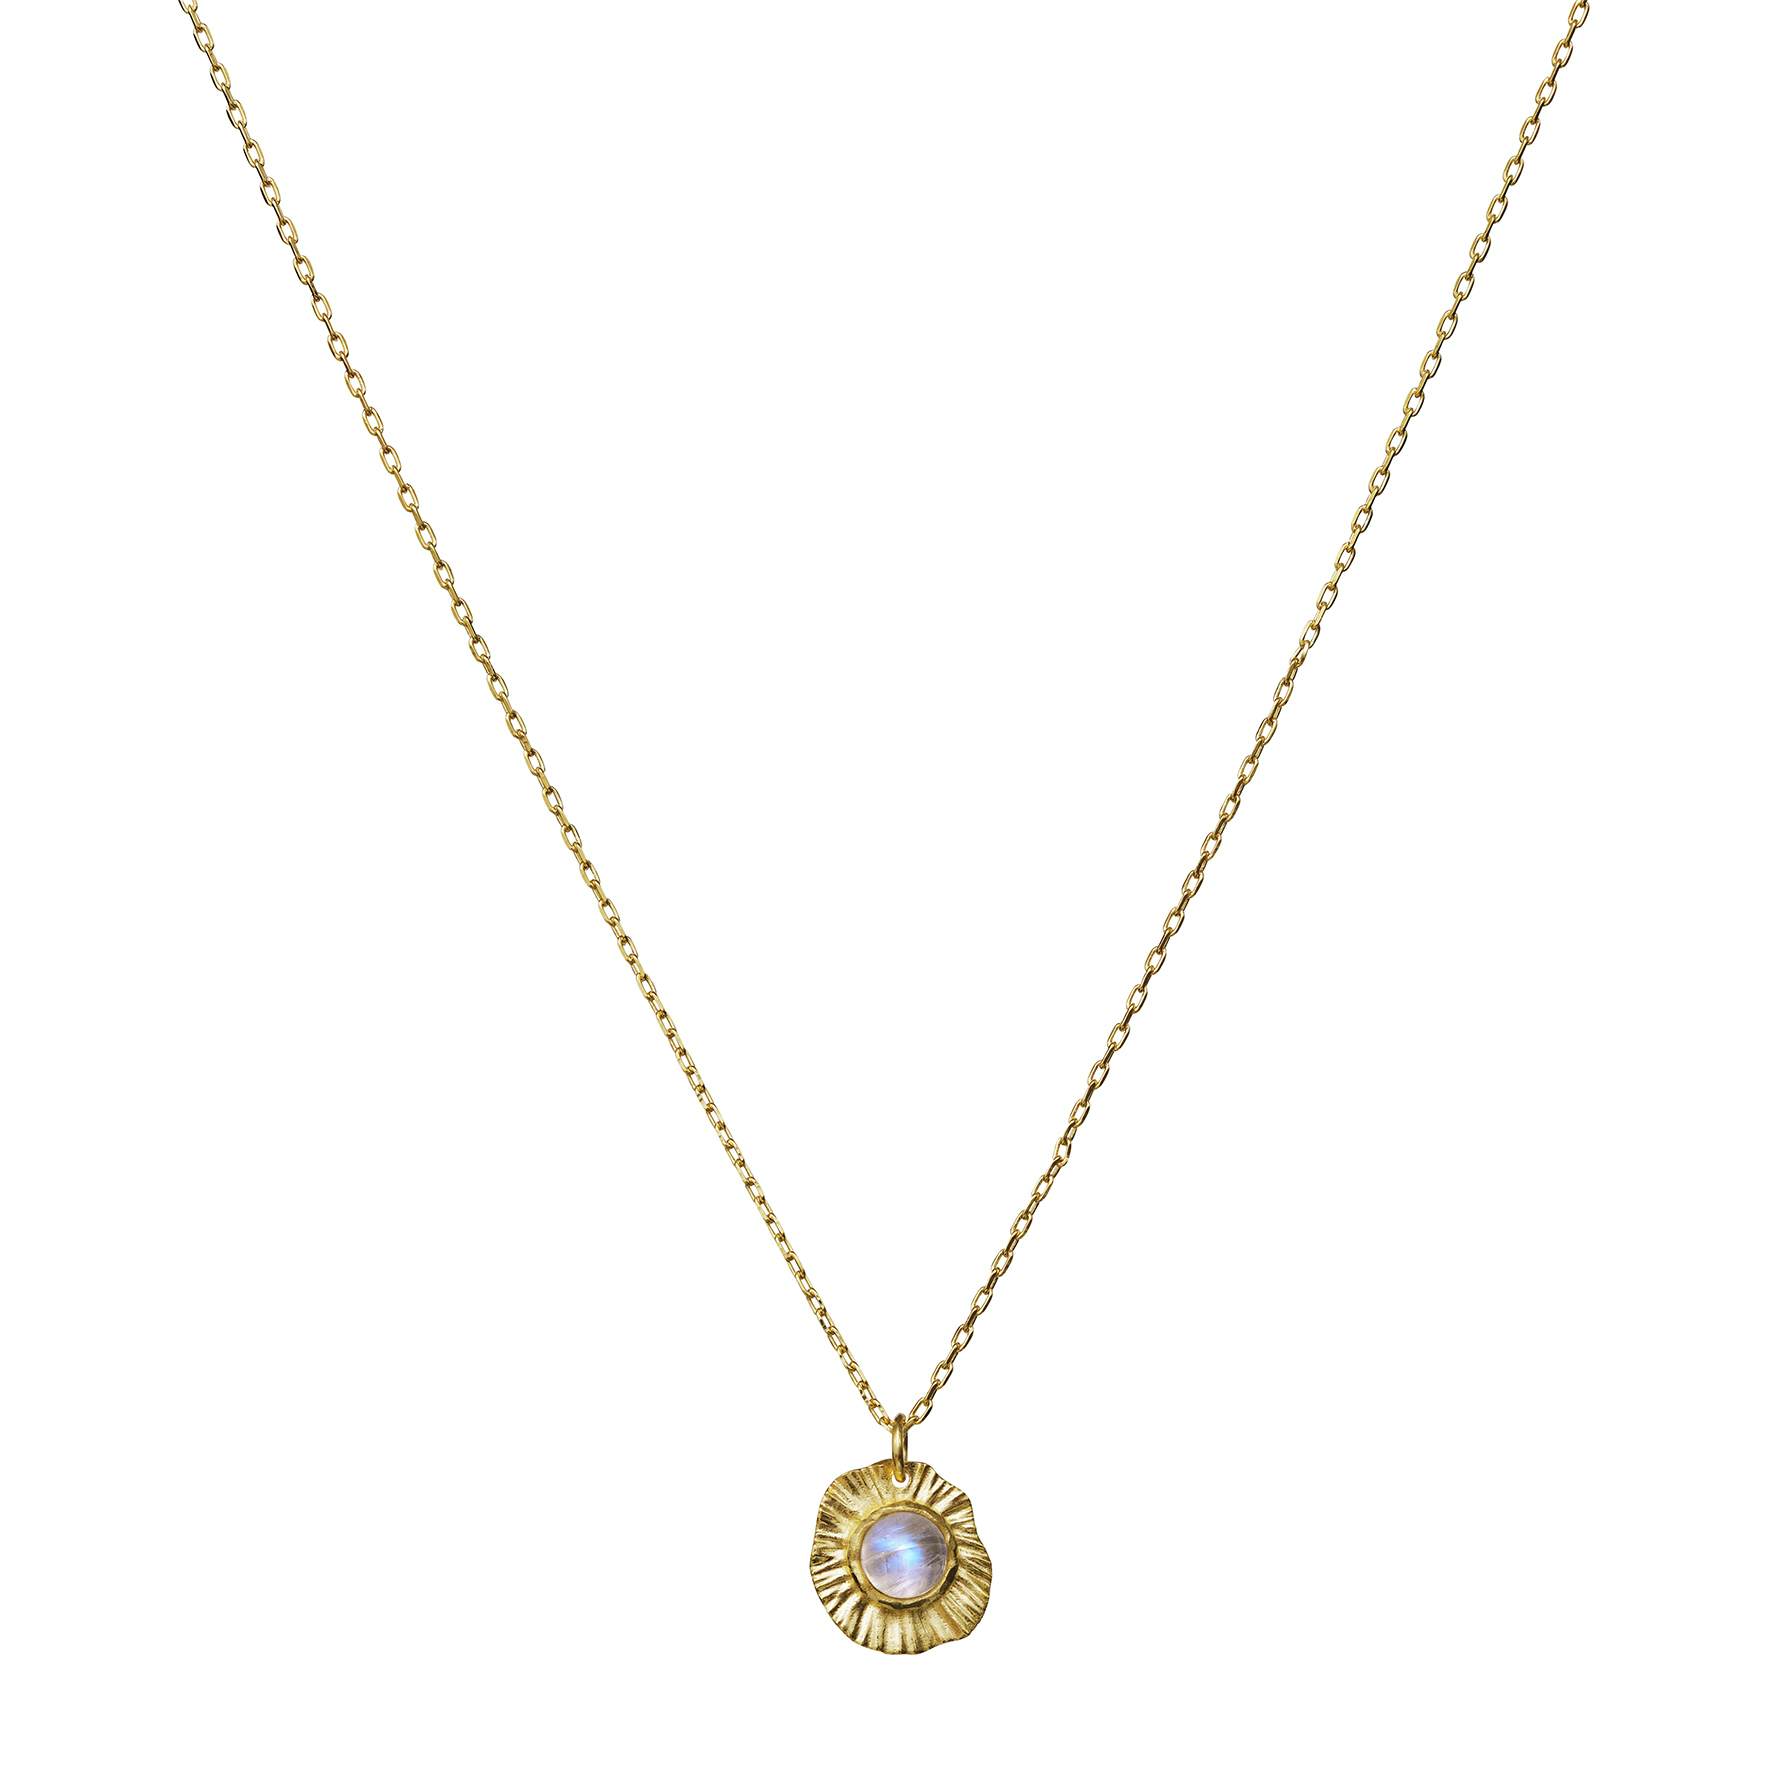 Astra Necklace from Maanesten in Goldplated-Silver Sterling 925